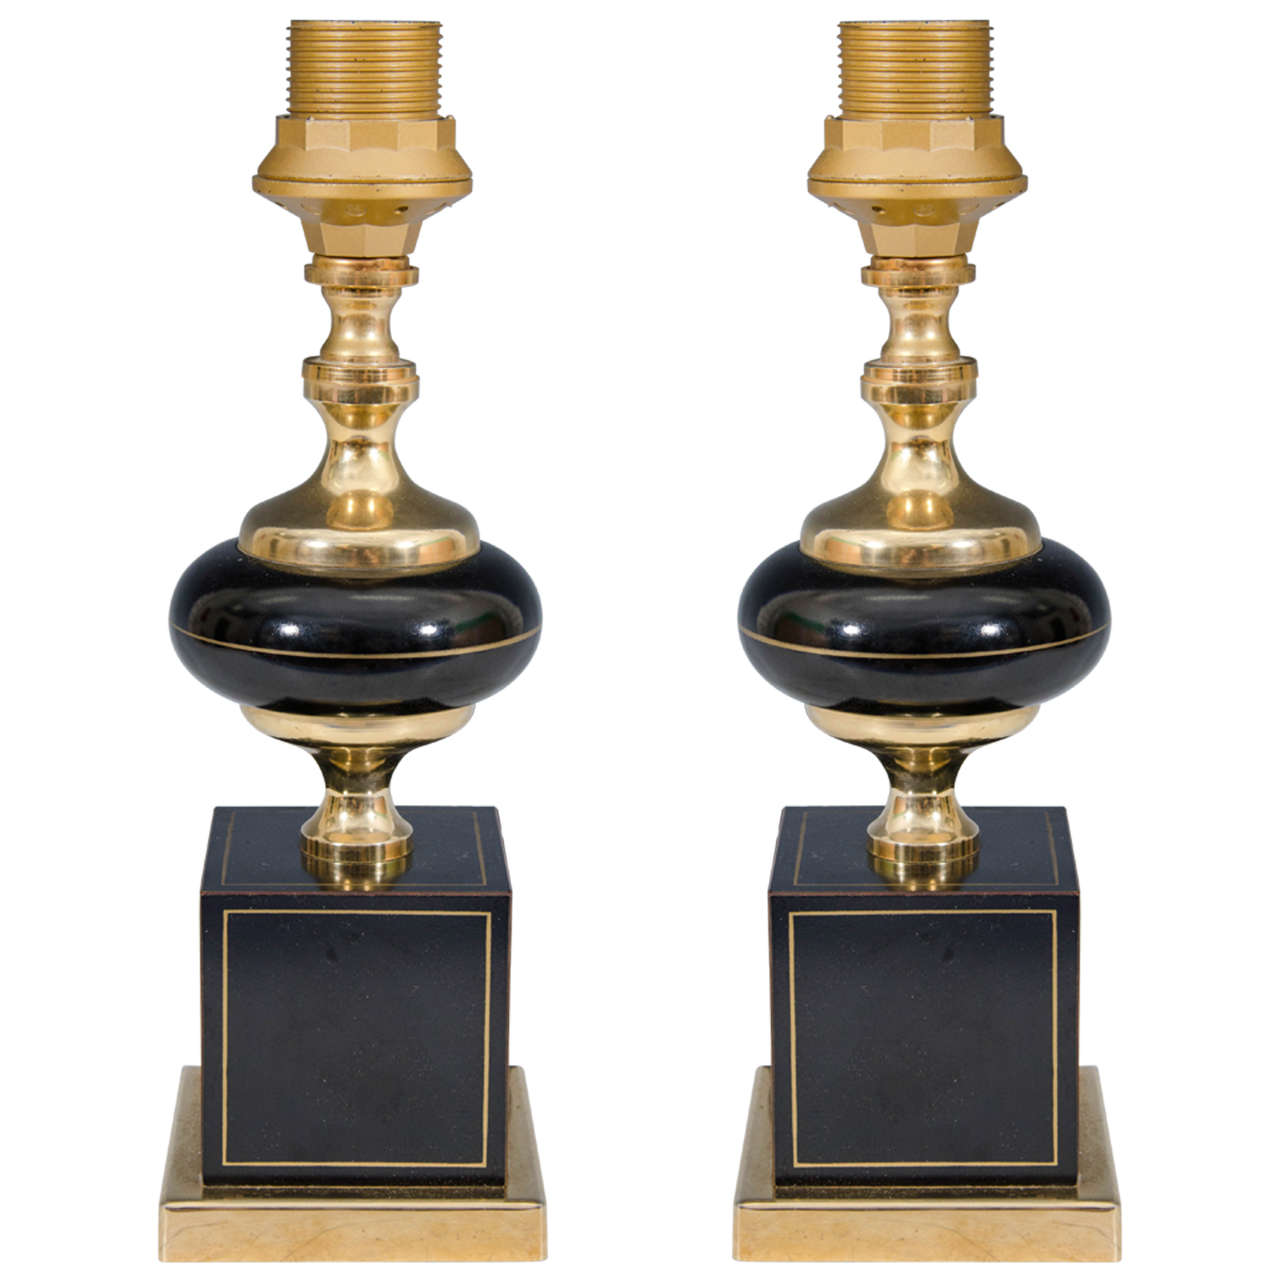 A Pair of French Midcentury Black Enamel and Brass Bedside Lamps